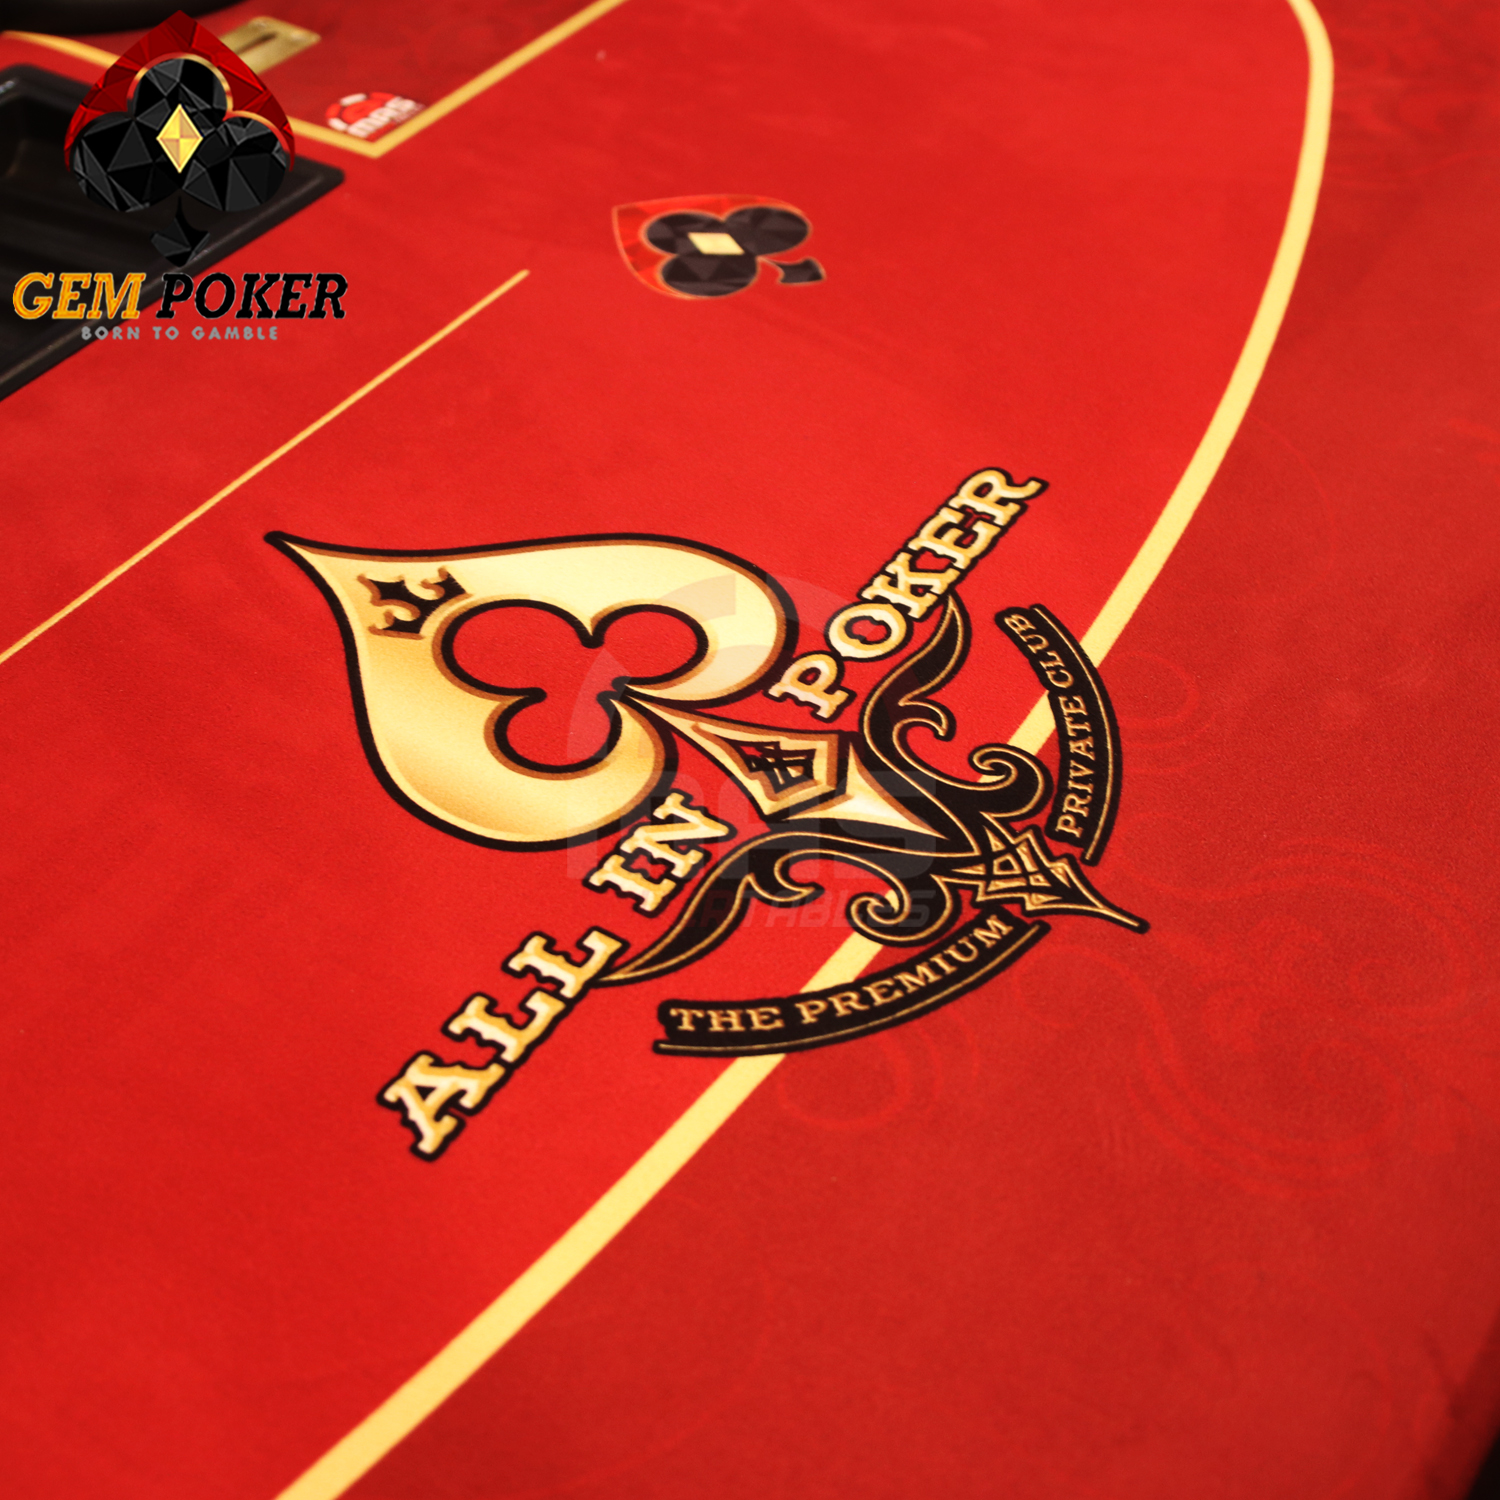 PROFESSIONAL POKER TABLE - P38